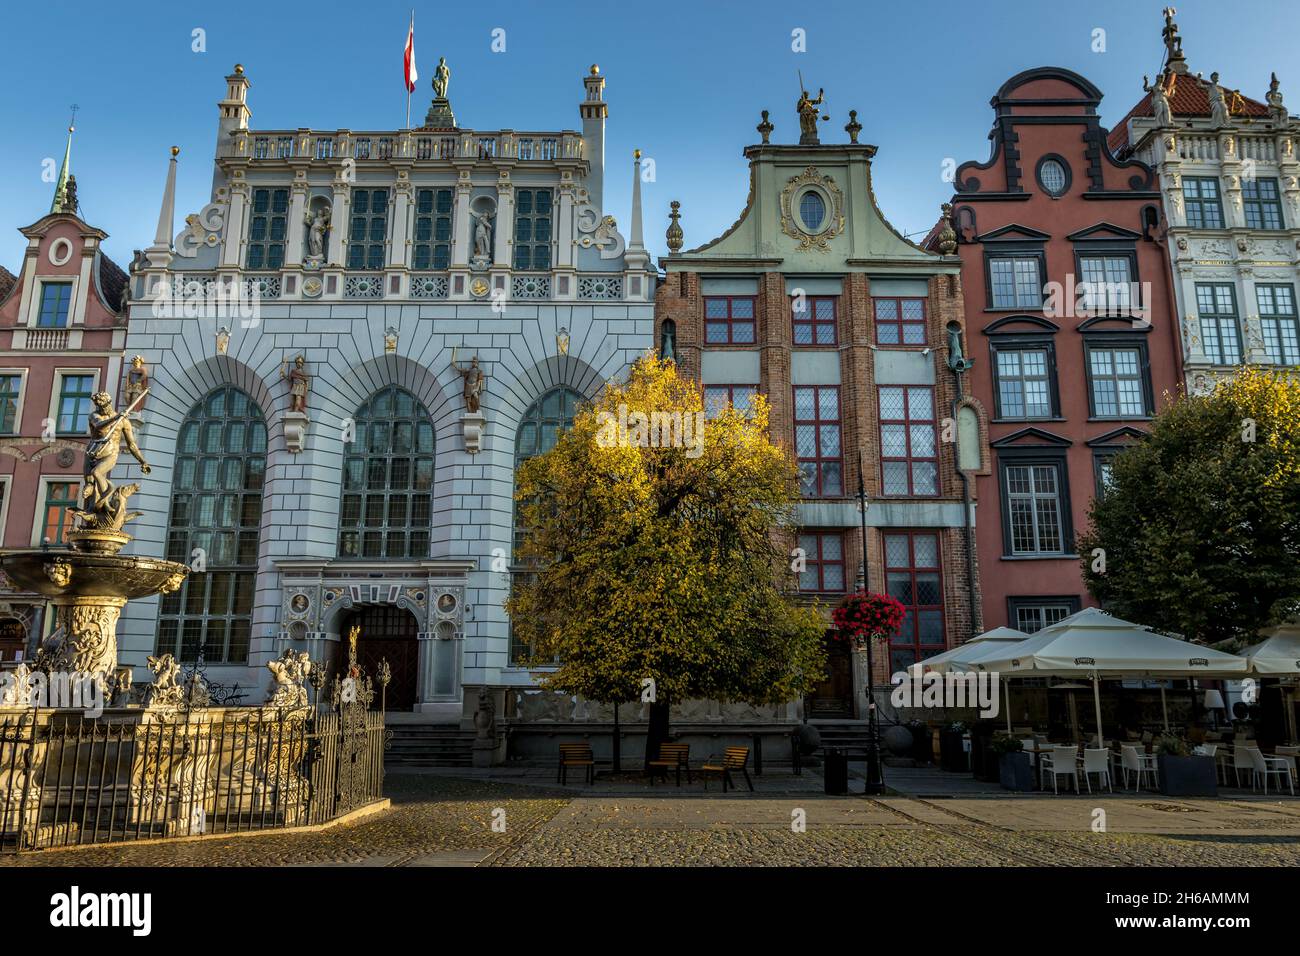 GDANSK, POLAND - Oct 08, 2021: The Neptune's Fountain in front of the entrance to the Artus Court in the old city of Gdansk, Poland Stock Photo